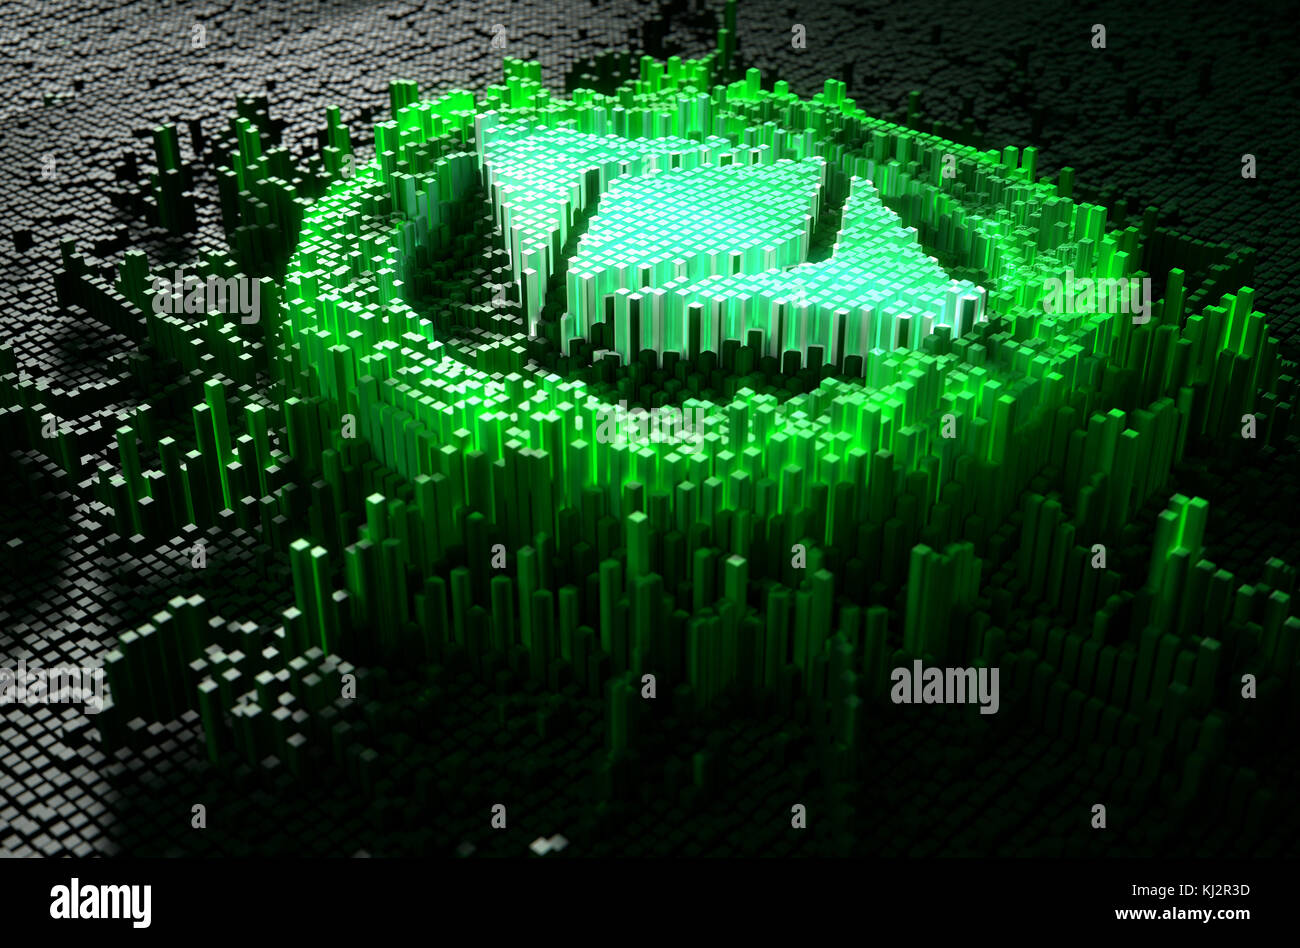 A microscopic closeup concept of small cubes in a random layout that build up to form the ethereum classic symbol illuminated - 3D render Stock Photo